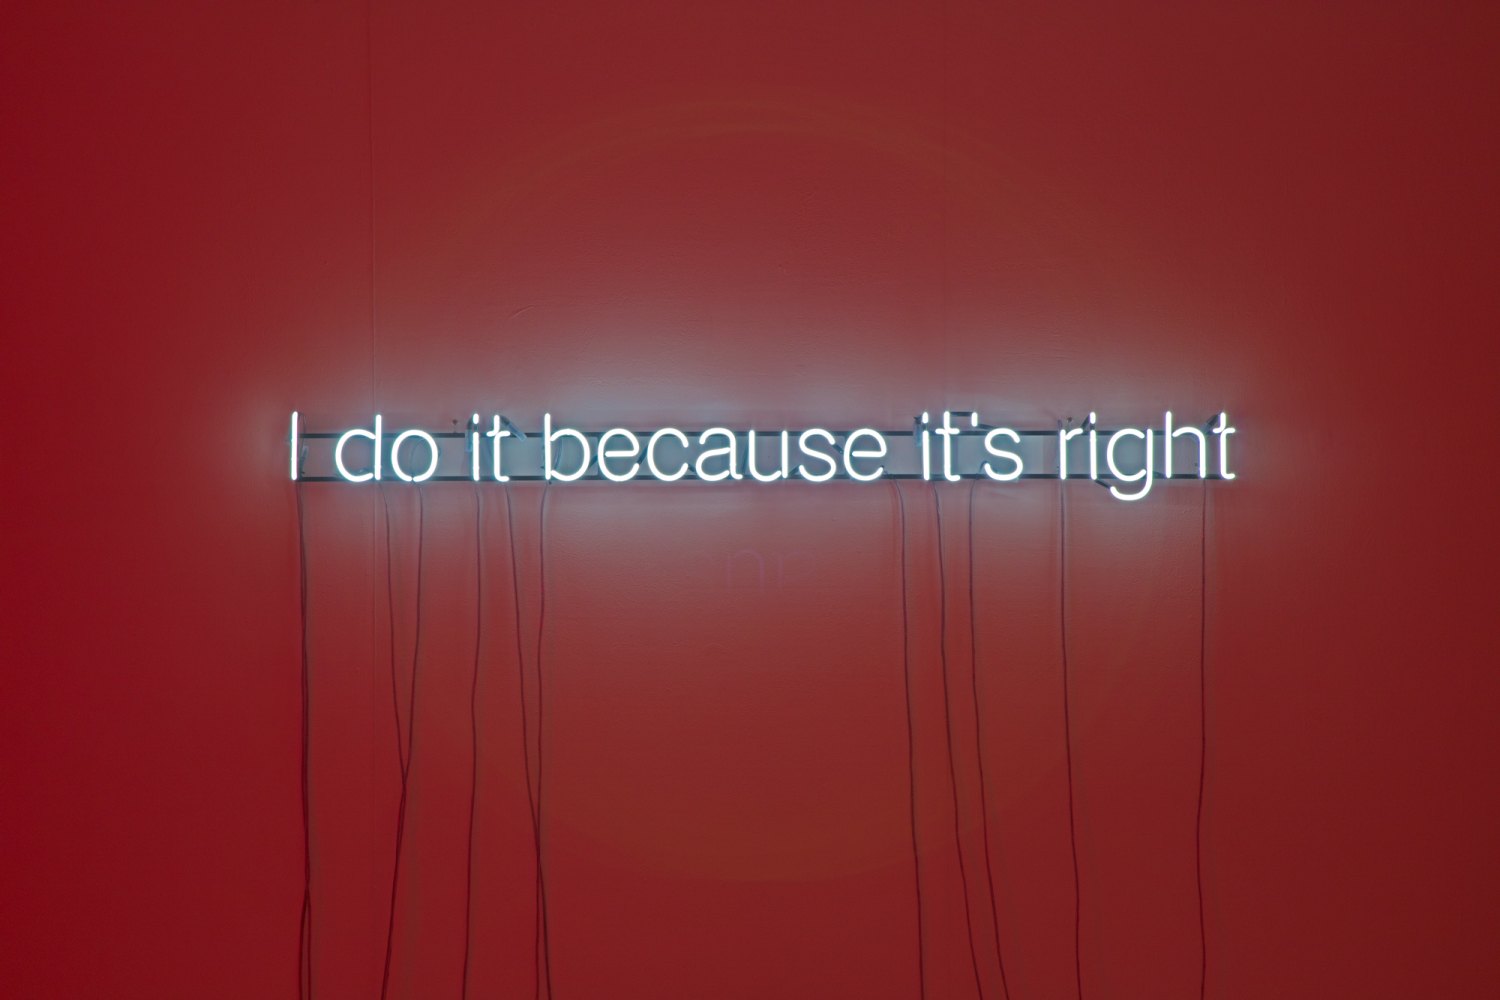 Claire Fontaine  Untitled (I do it because it’s right / It’s right because I do it), 2014 10 mm. back-painted. neon, framework, cables, sequencer and transformers, 200 x 20 x 5 cm 